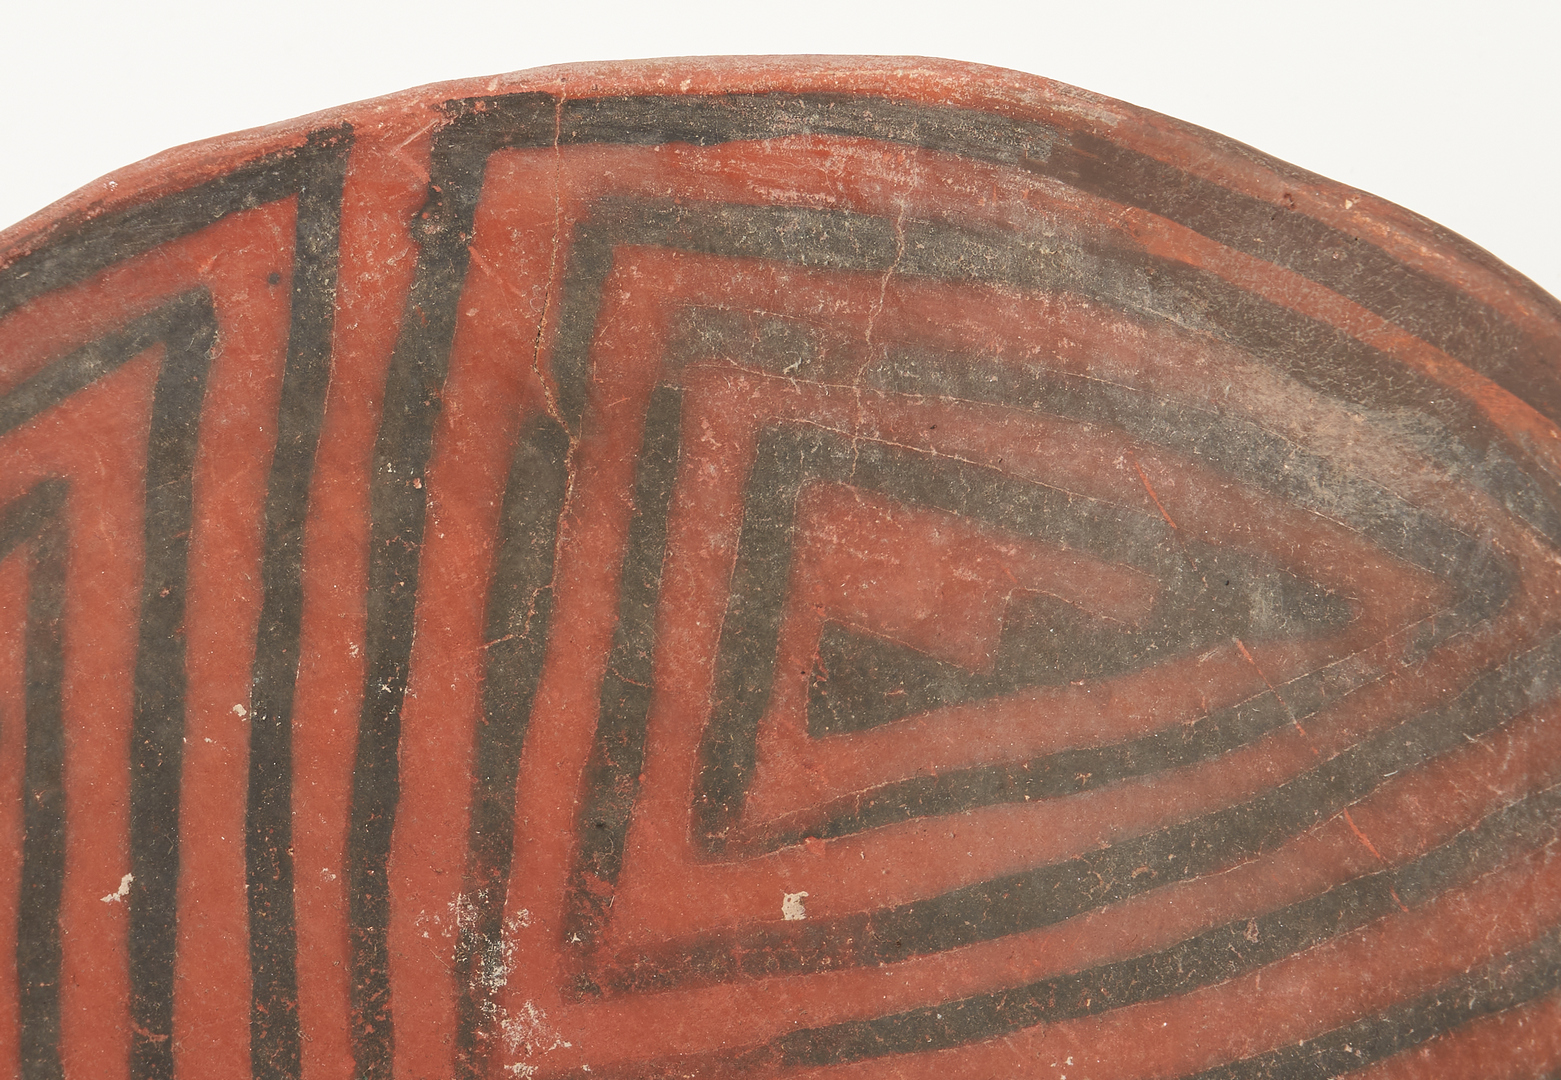 Lot 679: 4 Anasazi Culture Black on Red Pottery Bowls